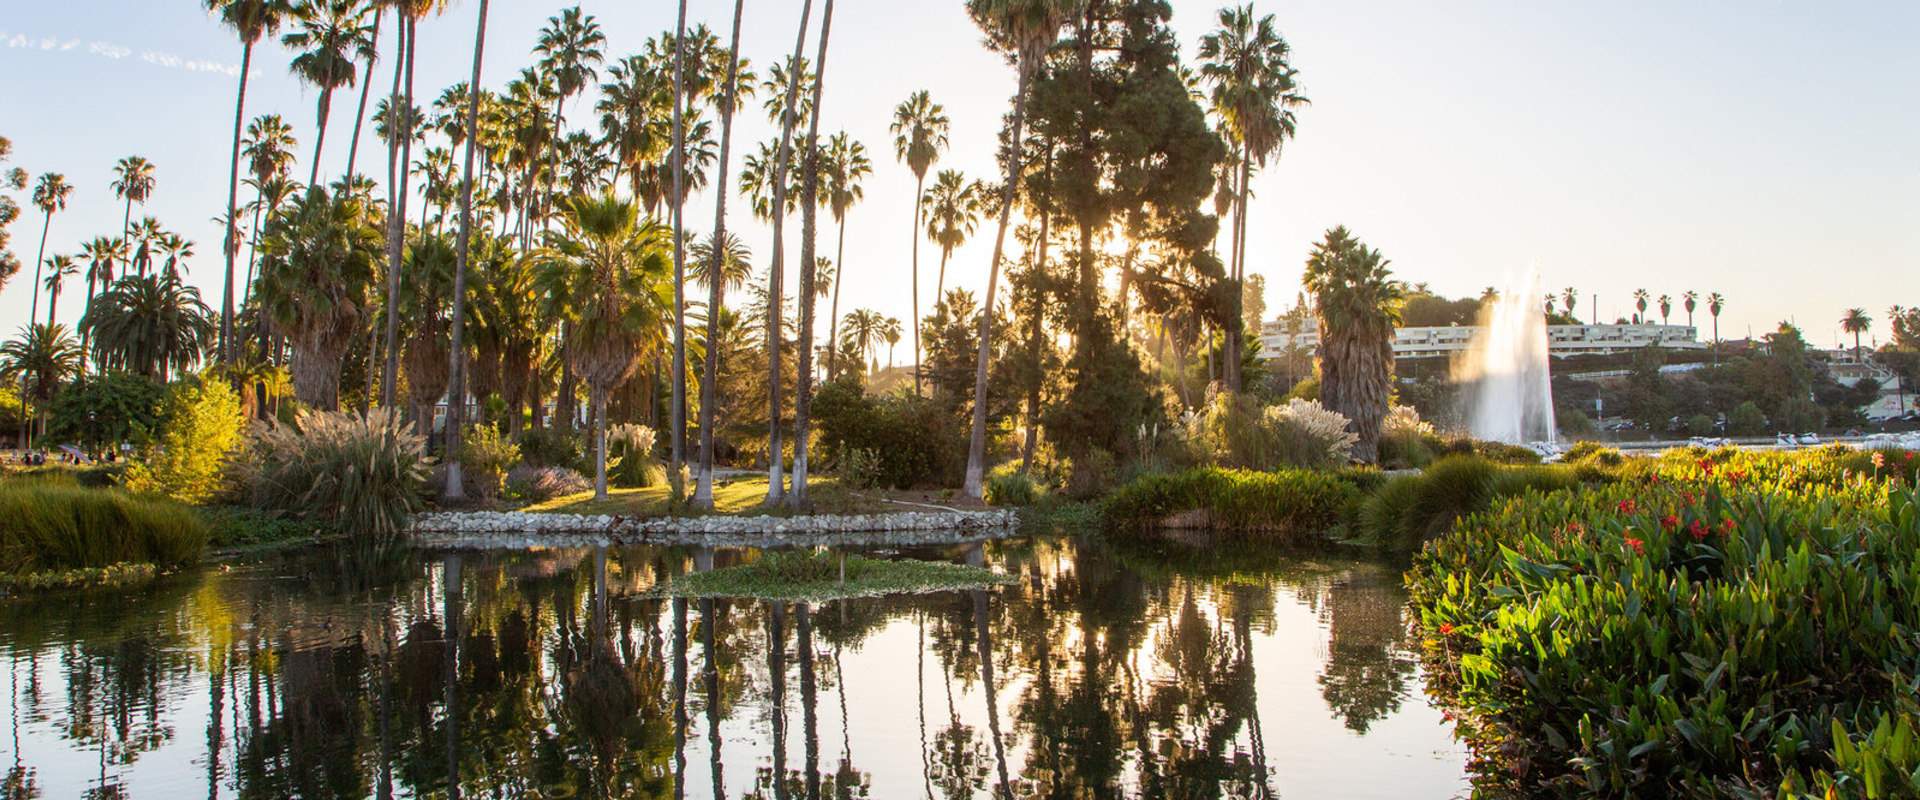 Green Spaces in Los Angeles: How Much is Enough?